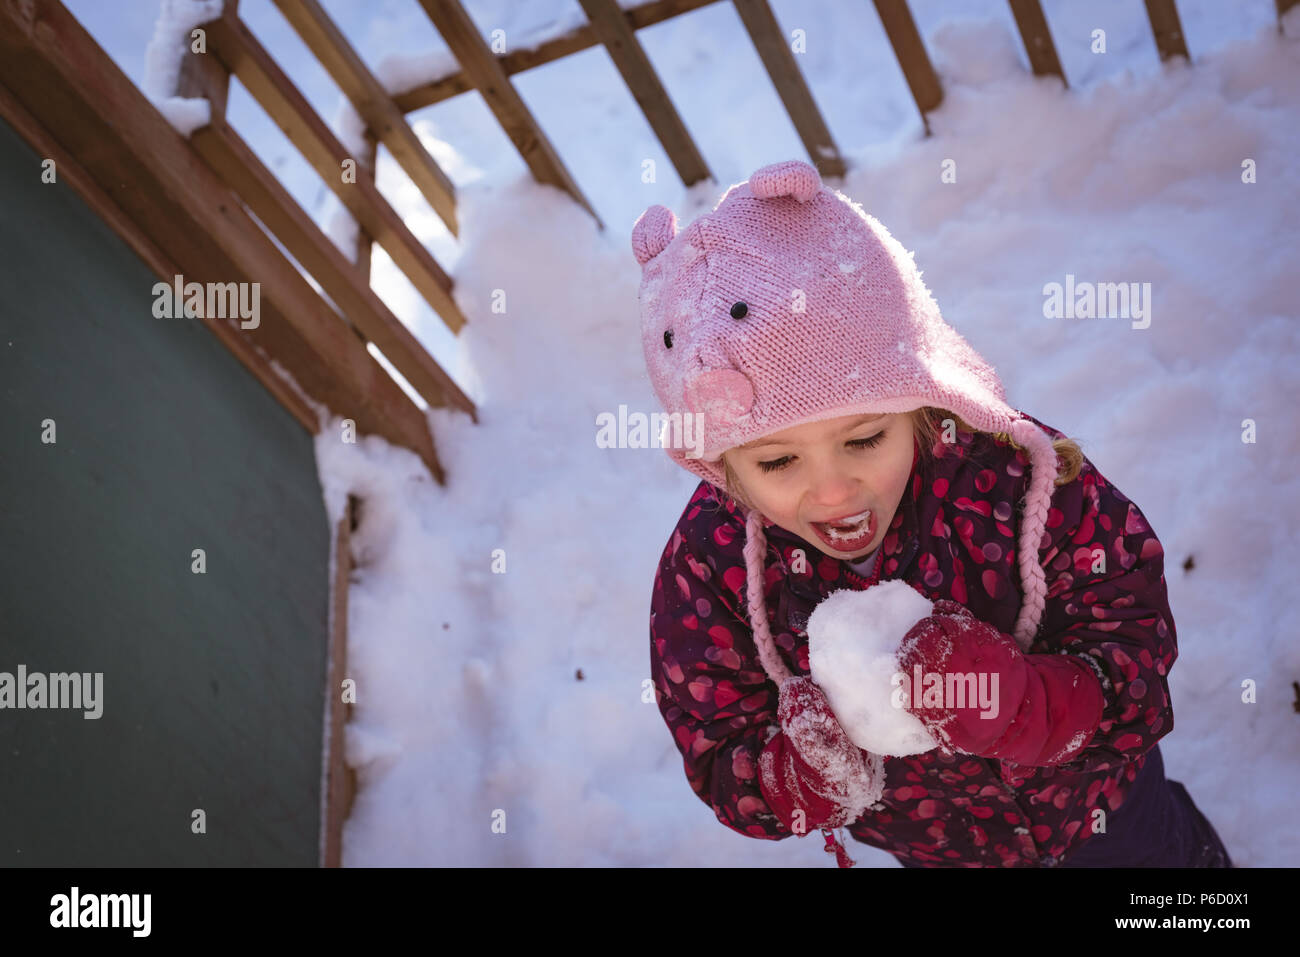 Cute girl licking snow during winter Stock Photo